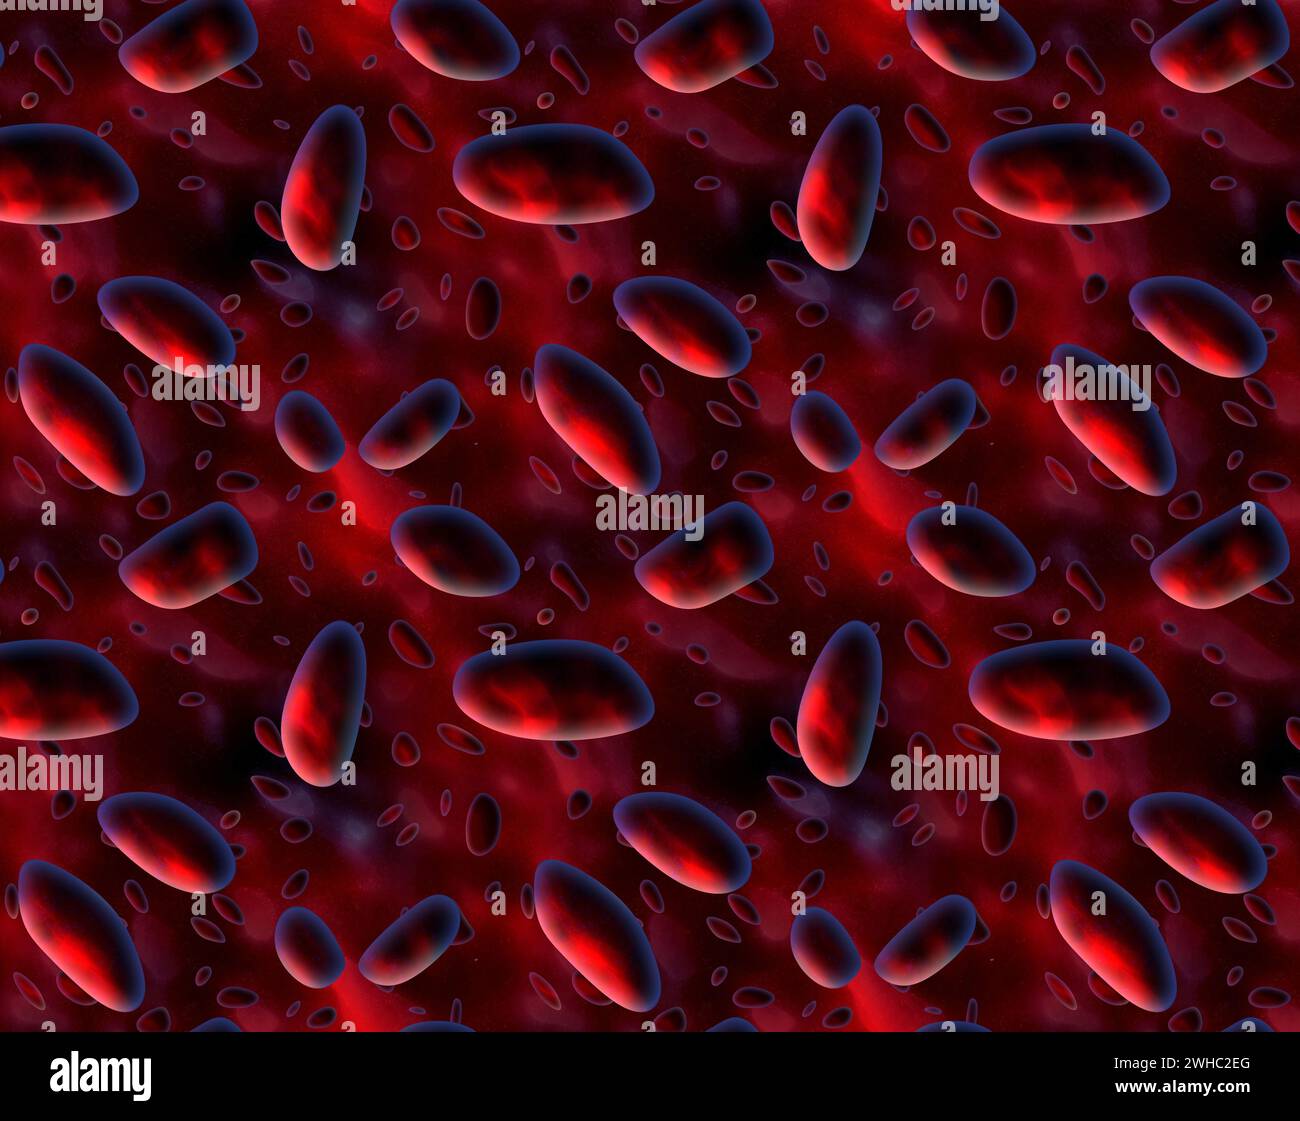 Blood cells Stock Photo